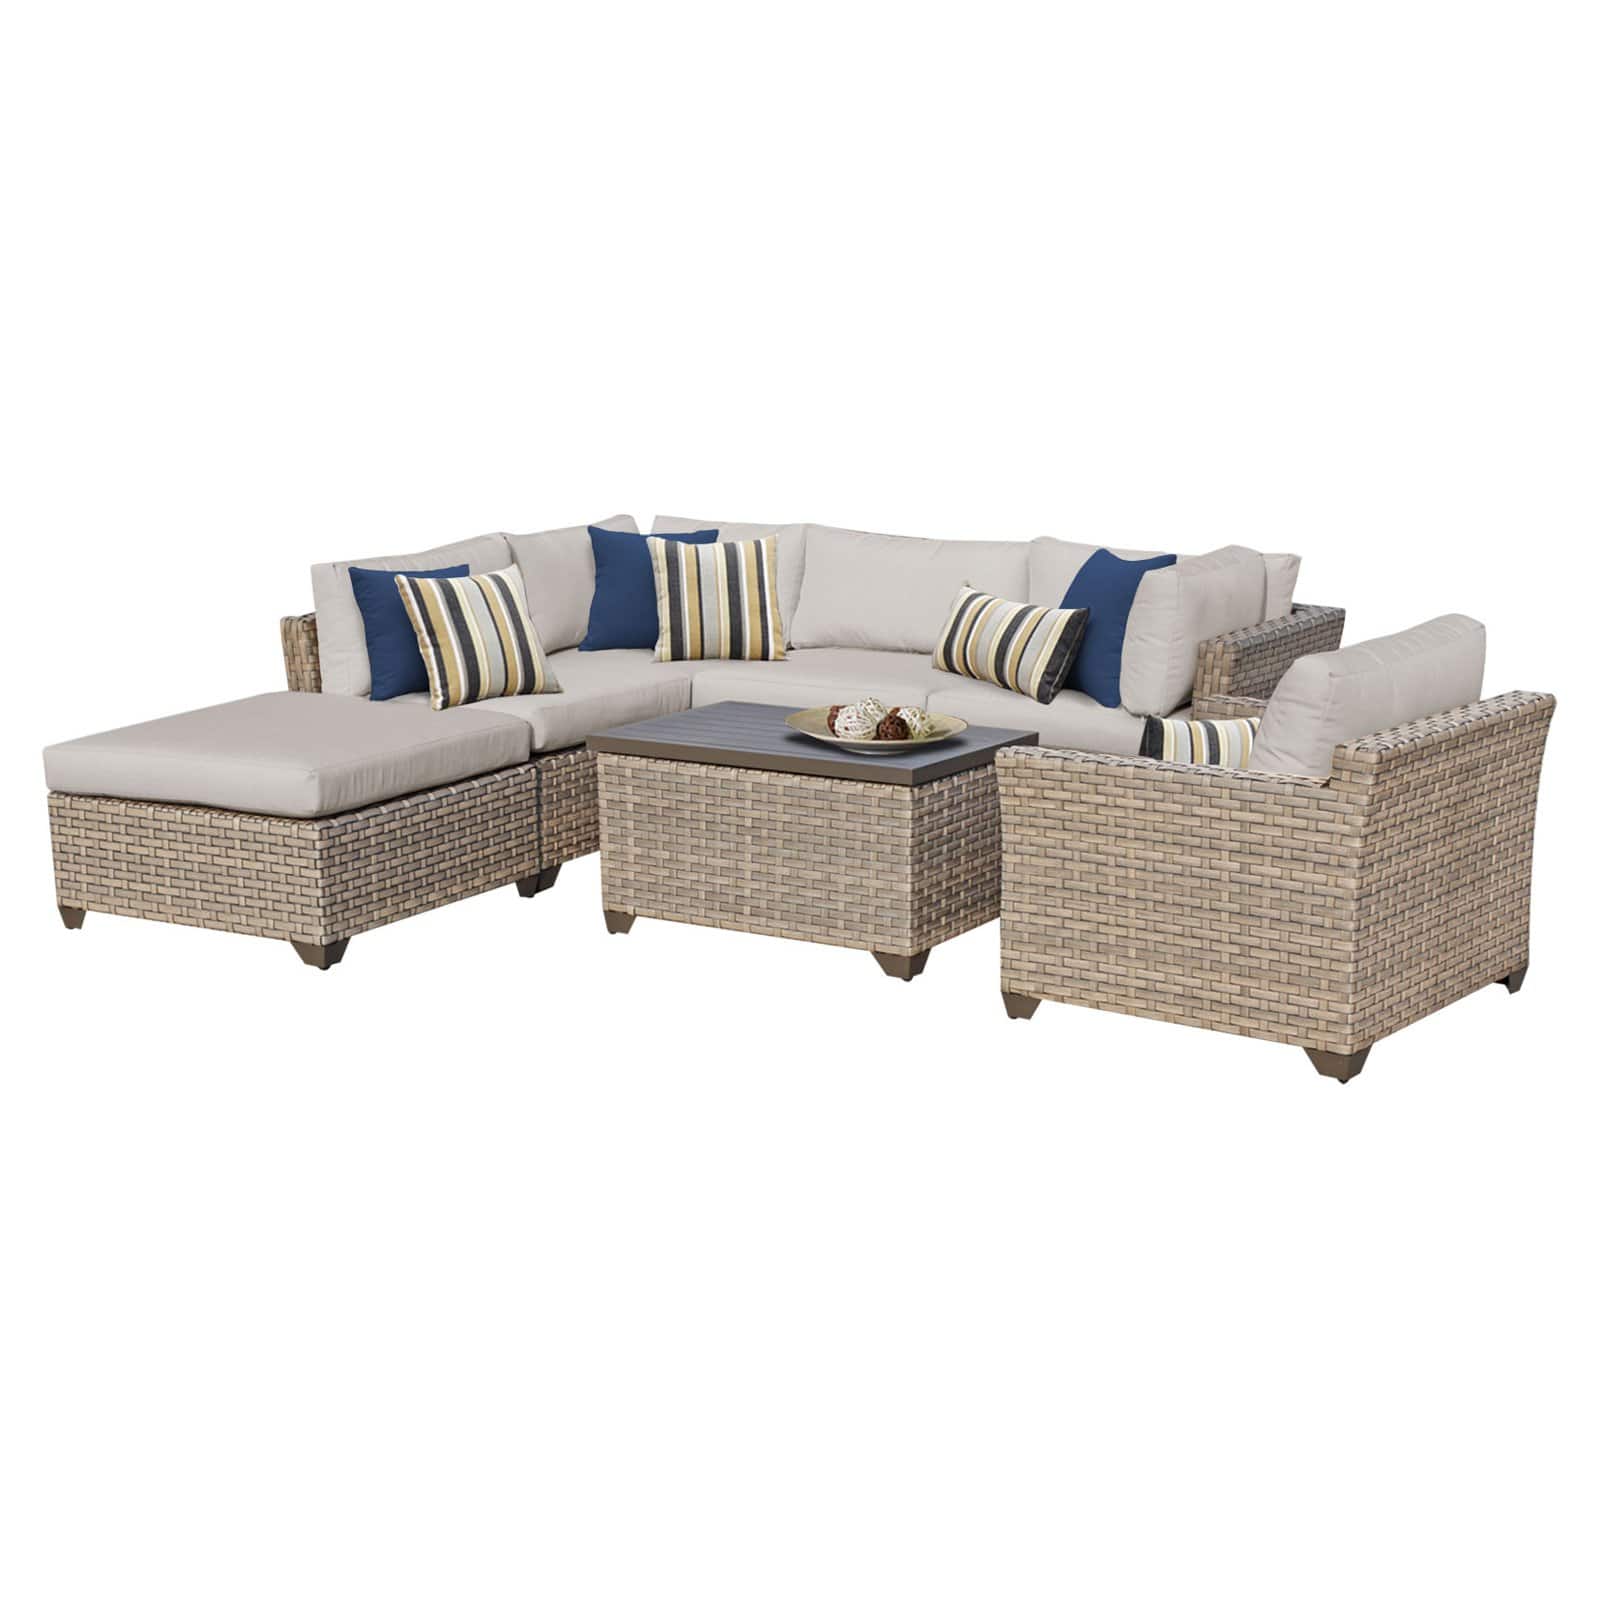 TK Classics Monterey Wicker 7 Piece Patio Conversation Set with Coffee Table and 2 Sets of Cushion Covers - image 2 of 5